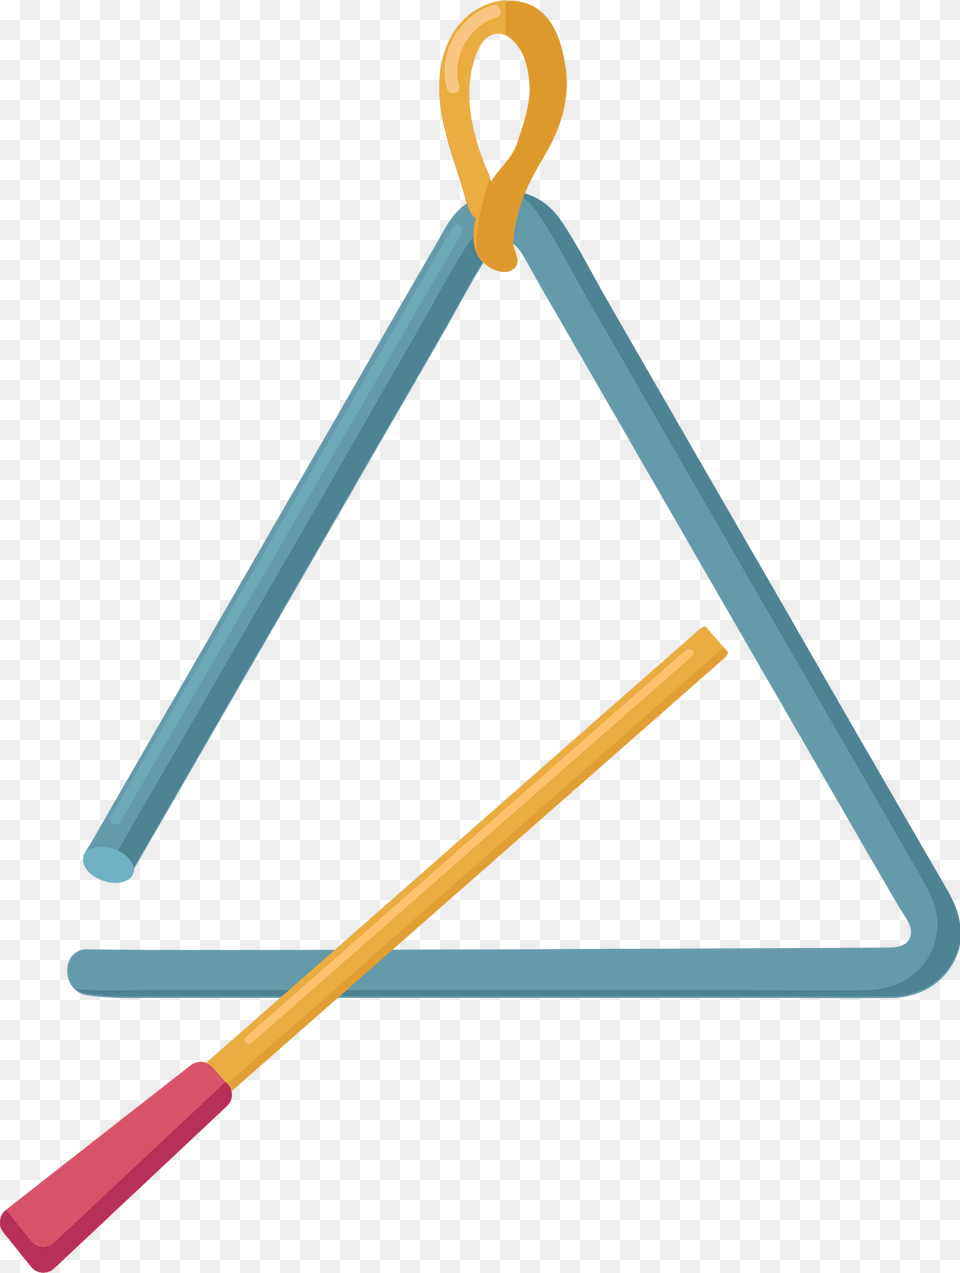 Triangle Instrument Clipart Free Png